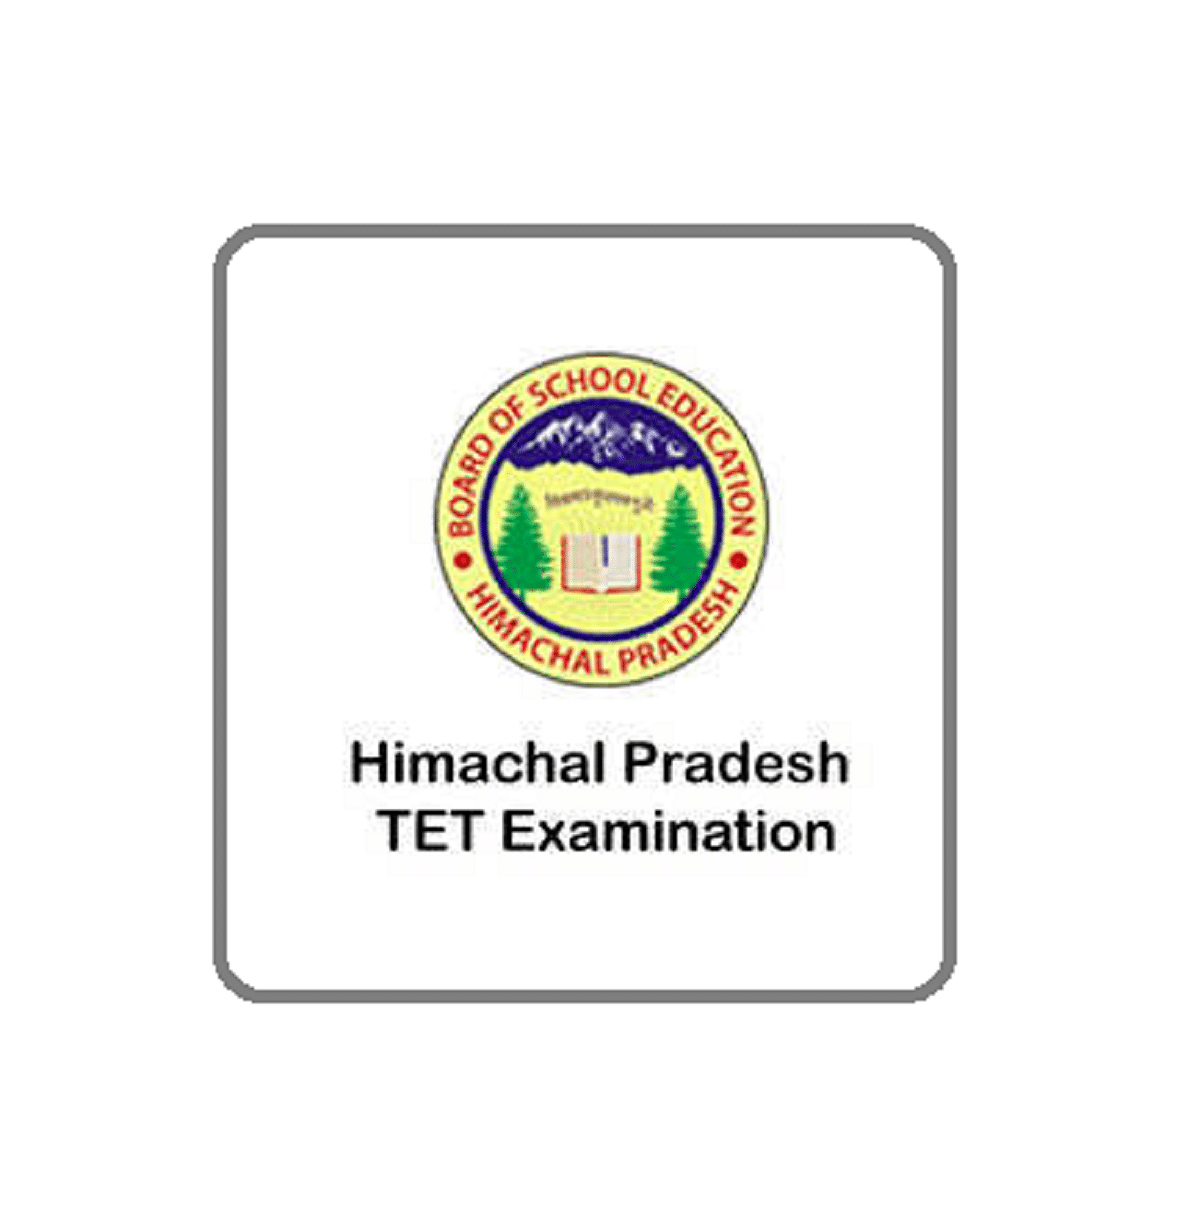 HP TET 2019: 3 More Days for Application Process to Conclude, Apply Through These Details